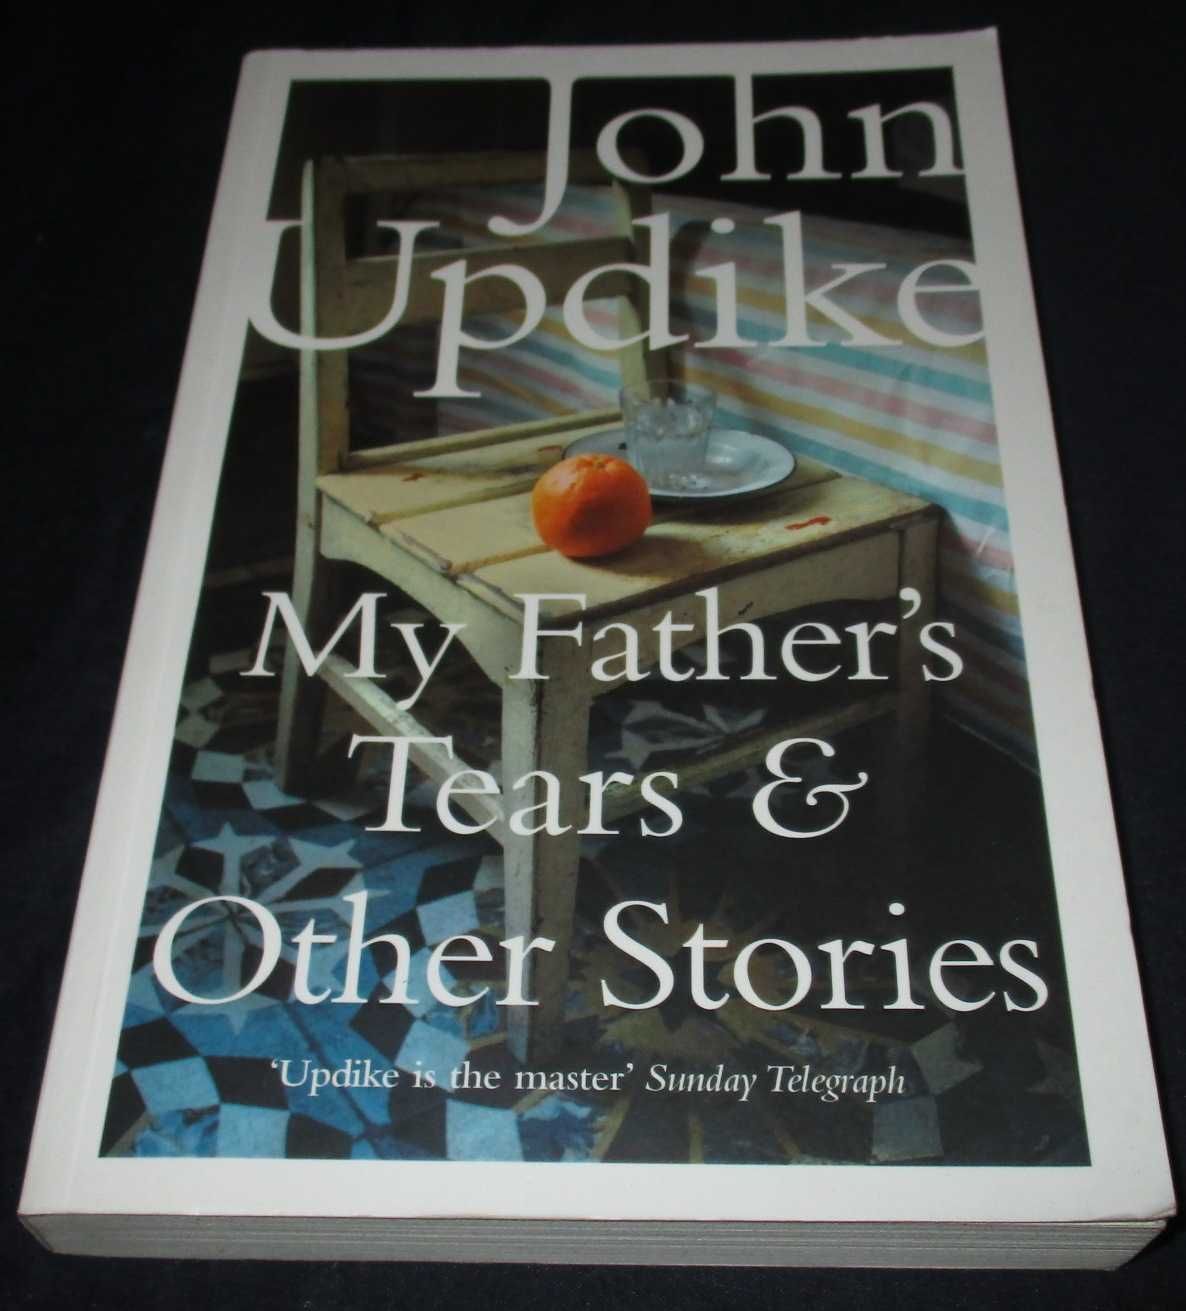 Livro My Father's Tears & Other Stories John Updike